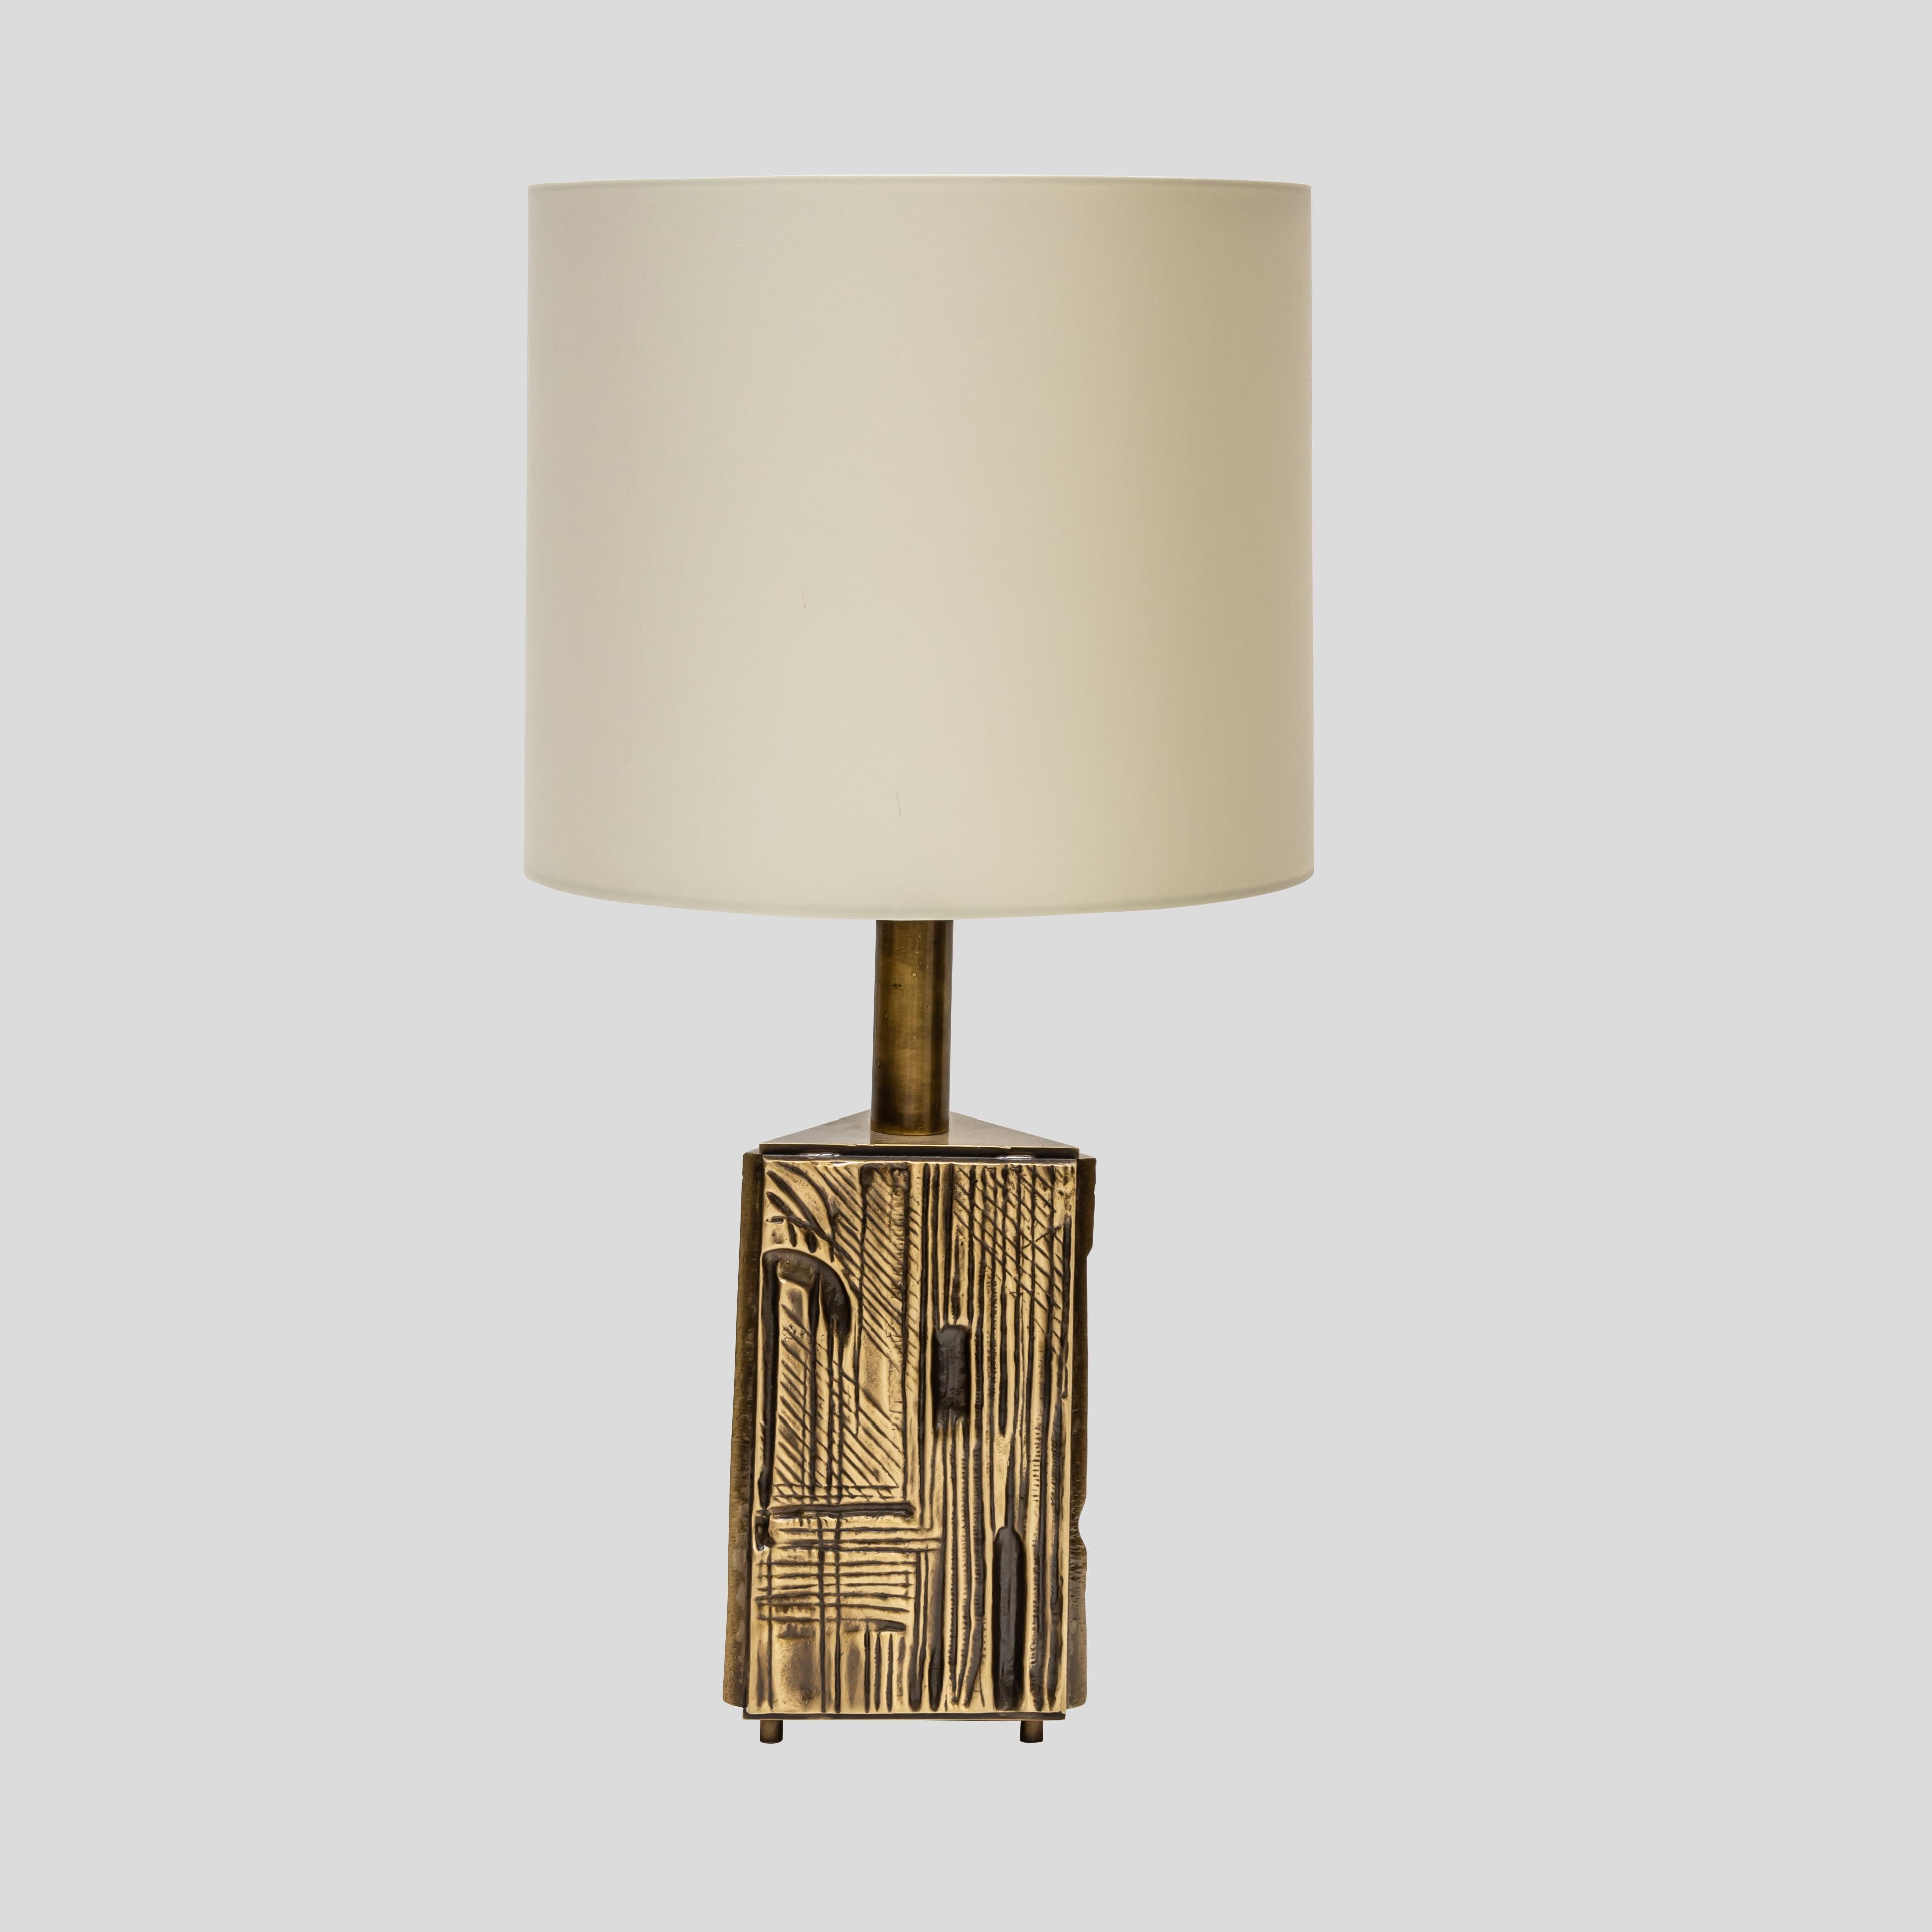 Mid-Century Modern Pair of Table Lamps 60s Italian Design by Luciano Frigerio Cream Silk Shades